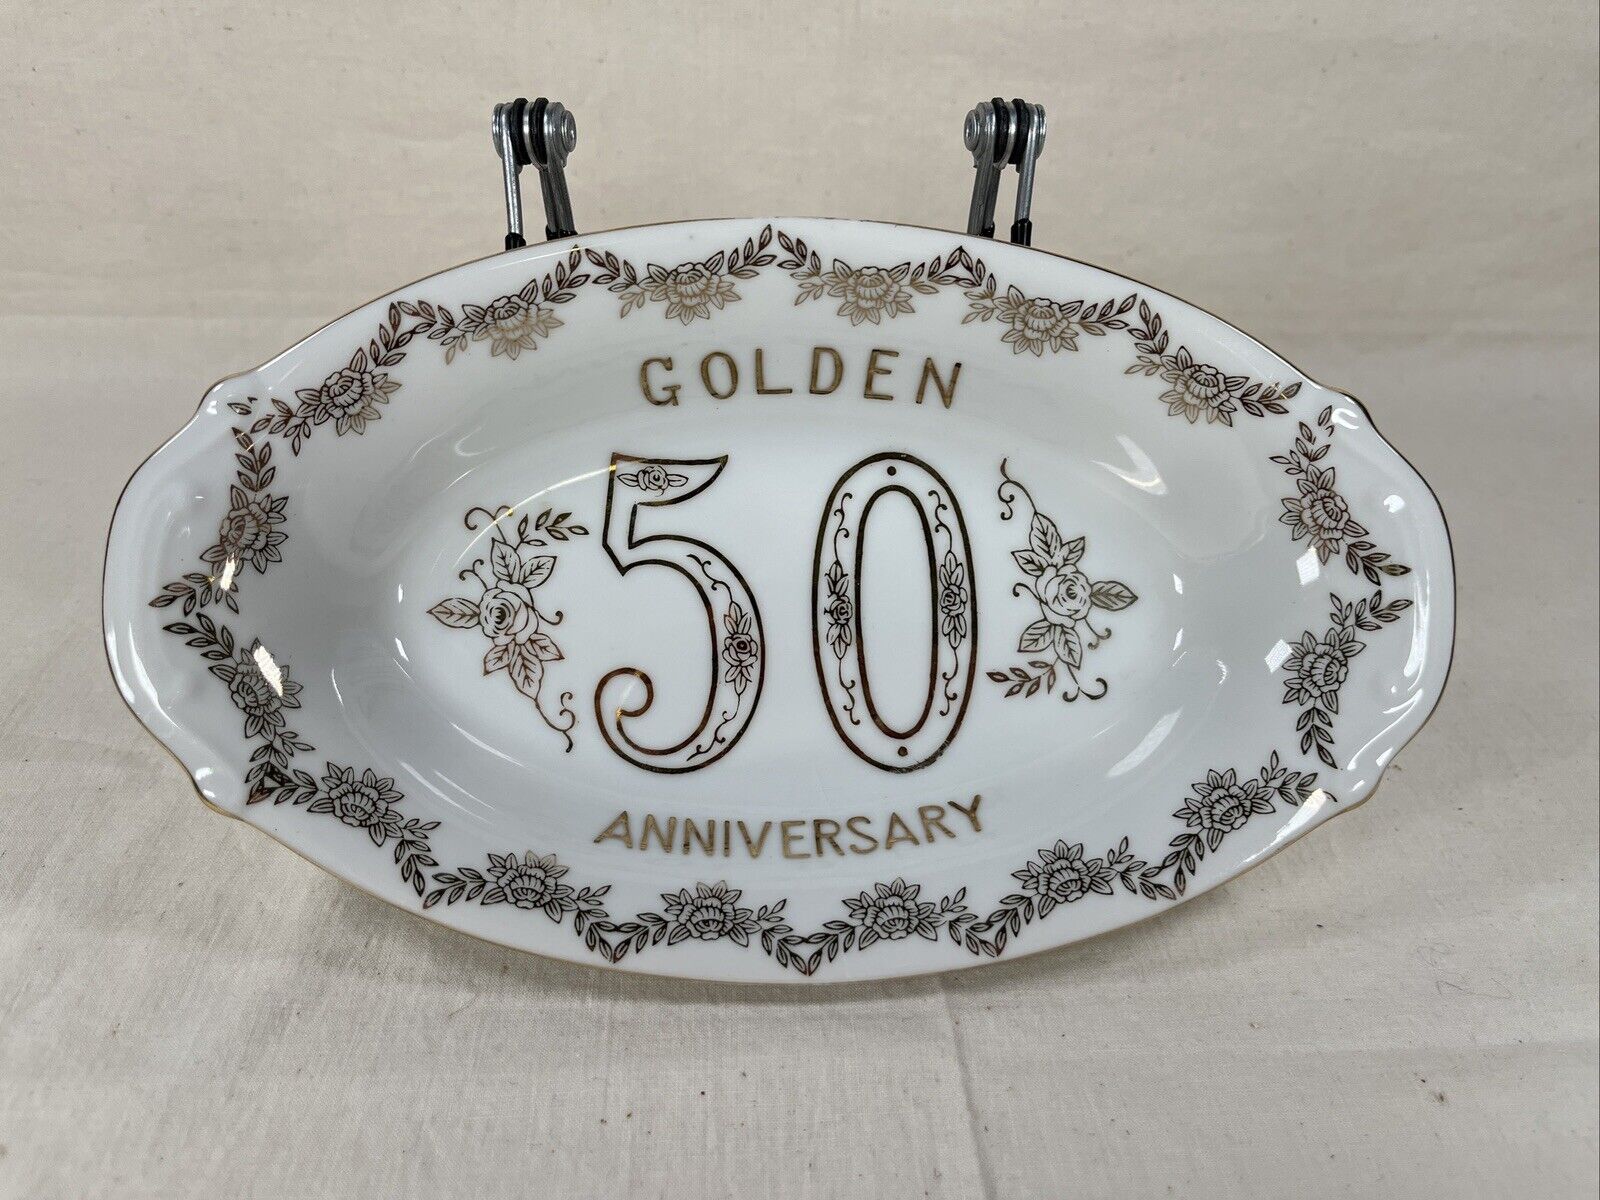 Vintage Golden 50 Anniversary 8.75” Oval Dish White with Goldtone Floral Design